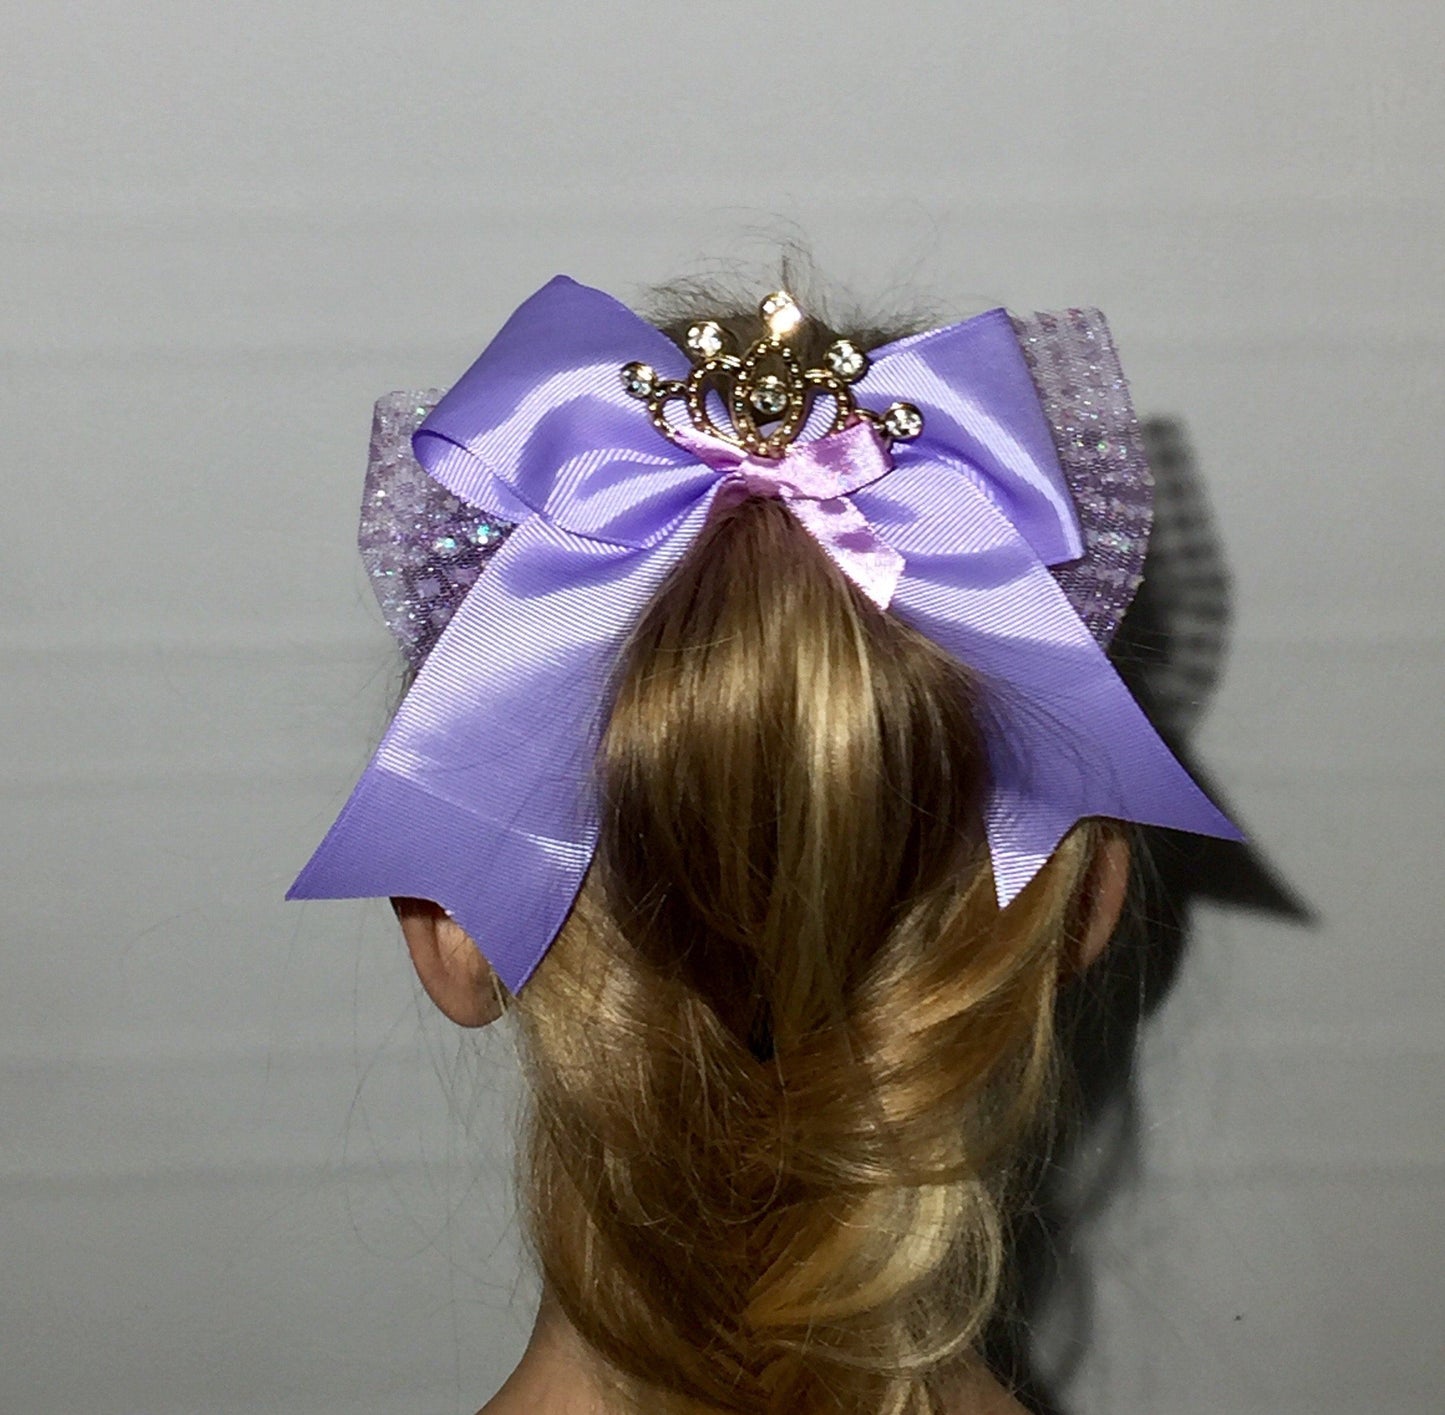 Girl's JoJo Inspired Cheer Big Hair Bow: Princess Tiara accessories MomMe and More 